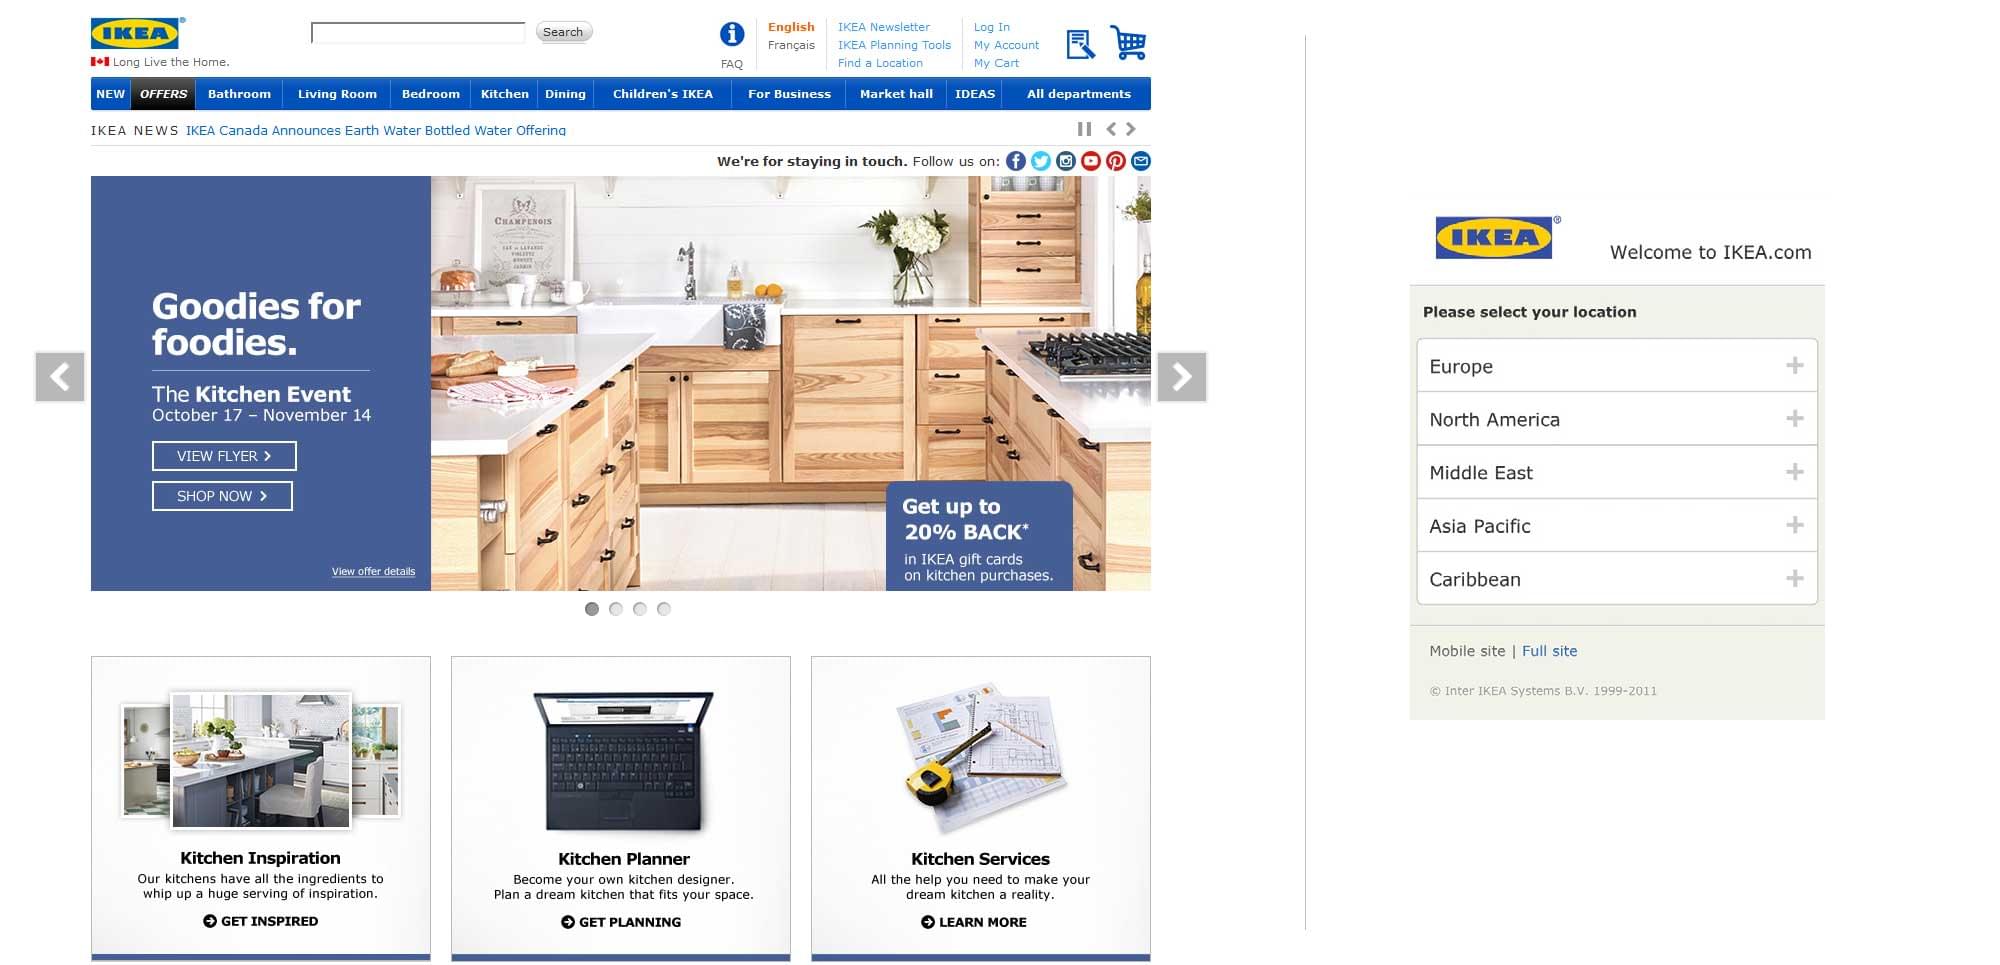 An image comparing the Ikea desktop and mobile sites which have different patterns for landing pages